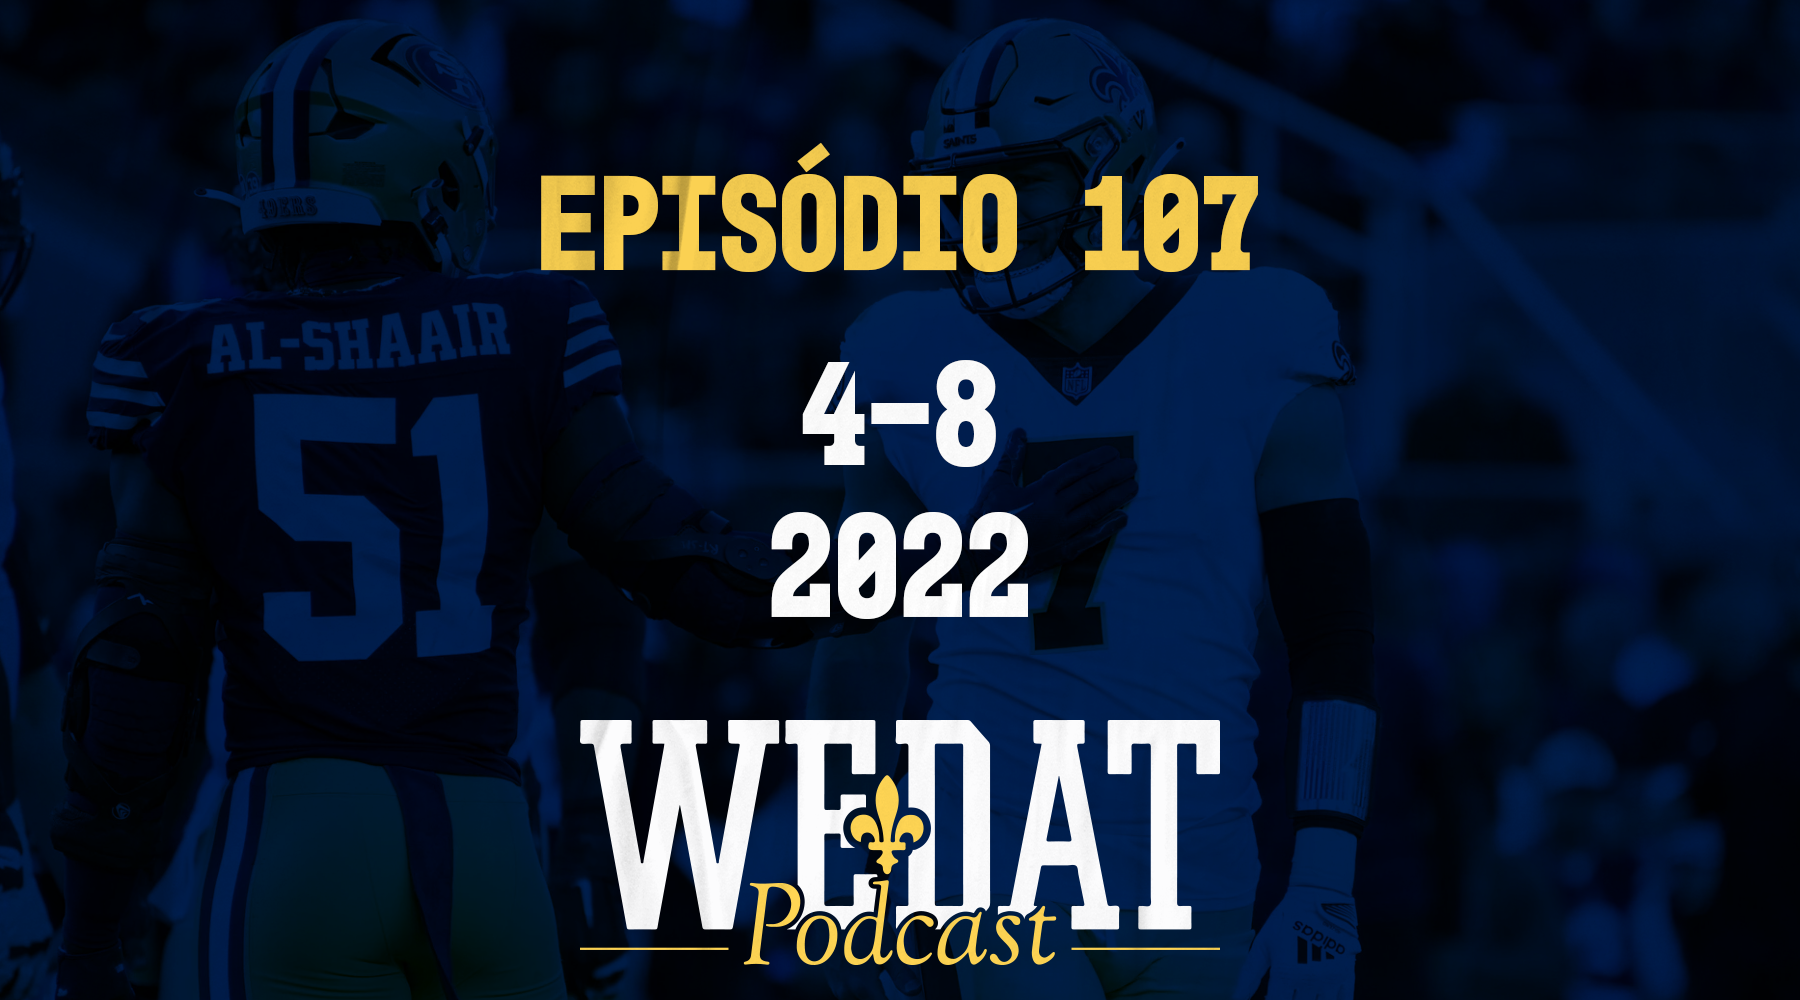 We Dat Podcast #107 – 4-8|2022